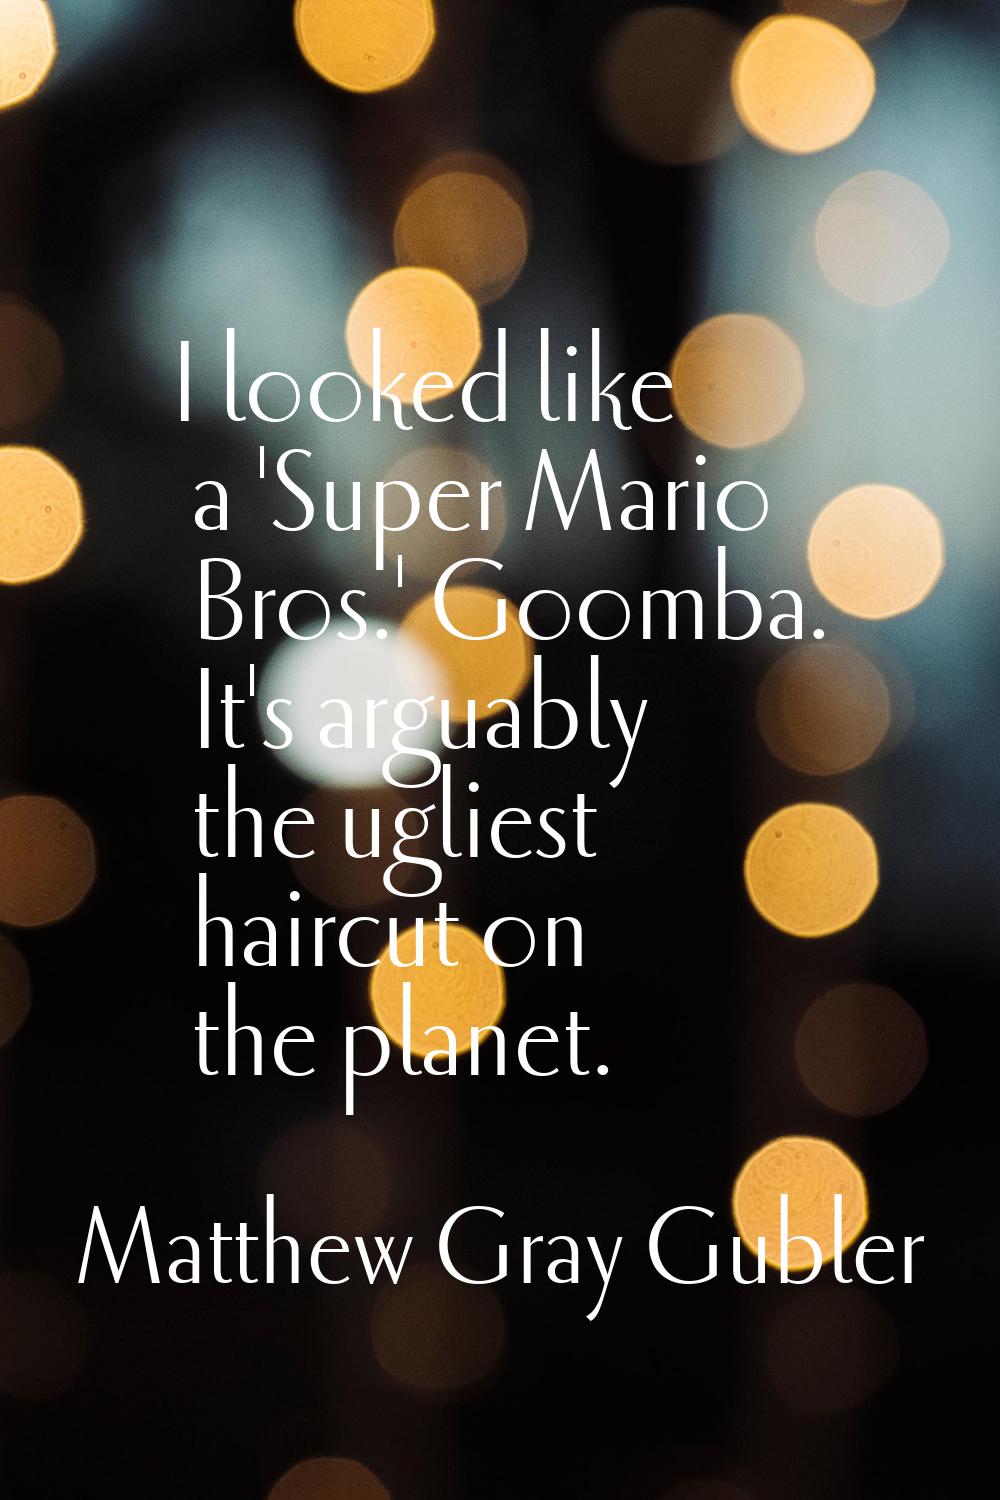 I looked like a 'Super Mario Bros.' Goomba. It's arguably the ugliest haircut on the planet.